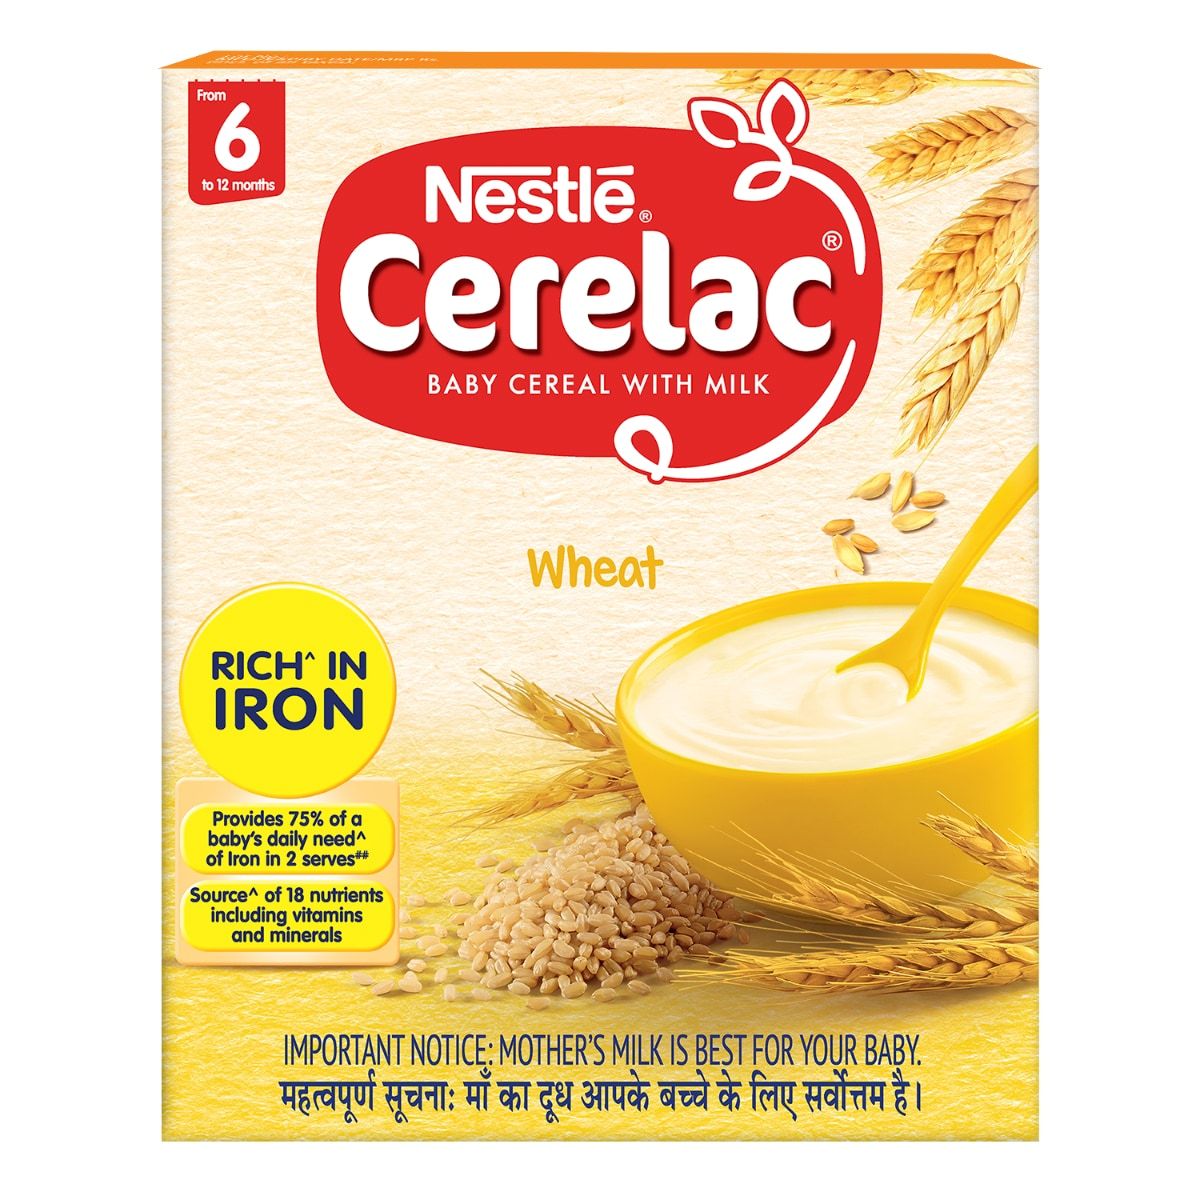 Nestle Cerelac Baby Cereal with Milk Wheat (From 6 to 12 months)